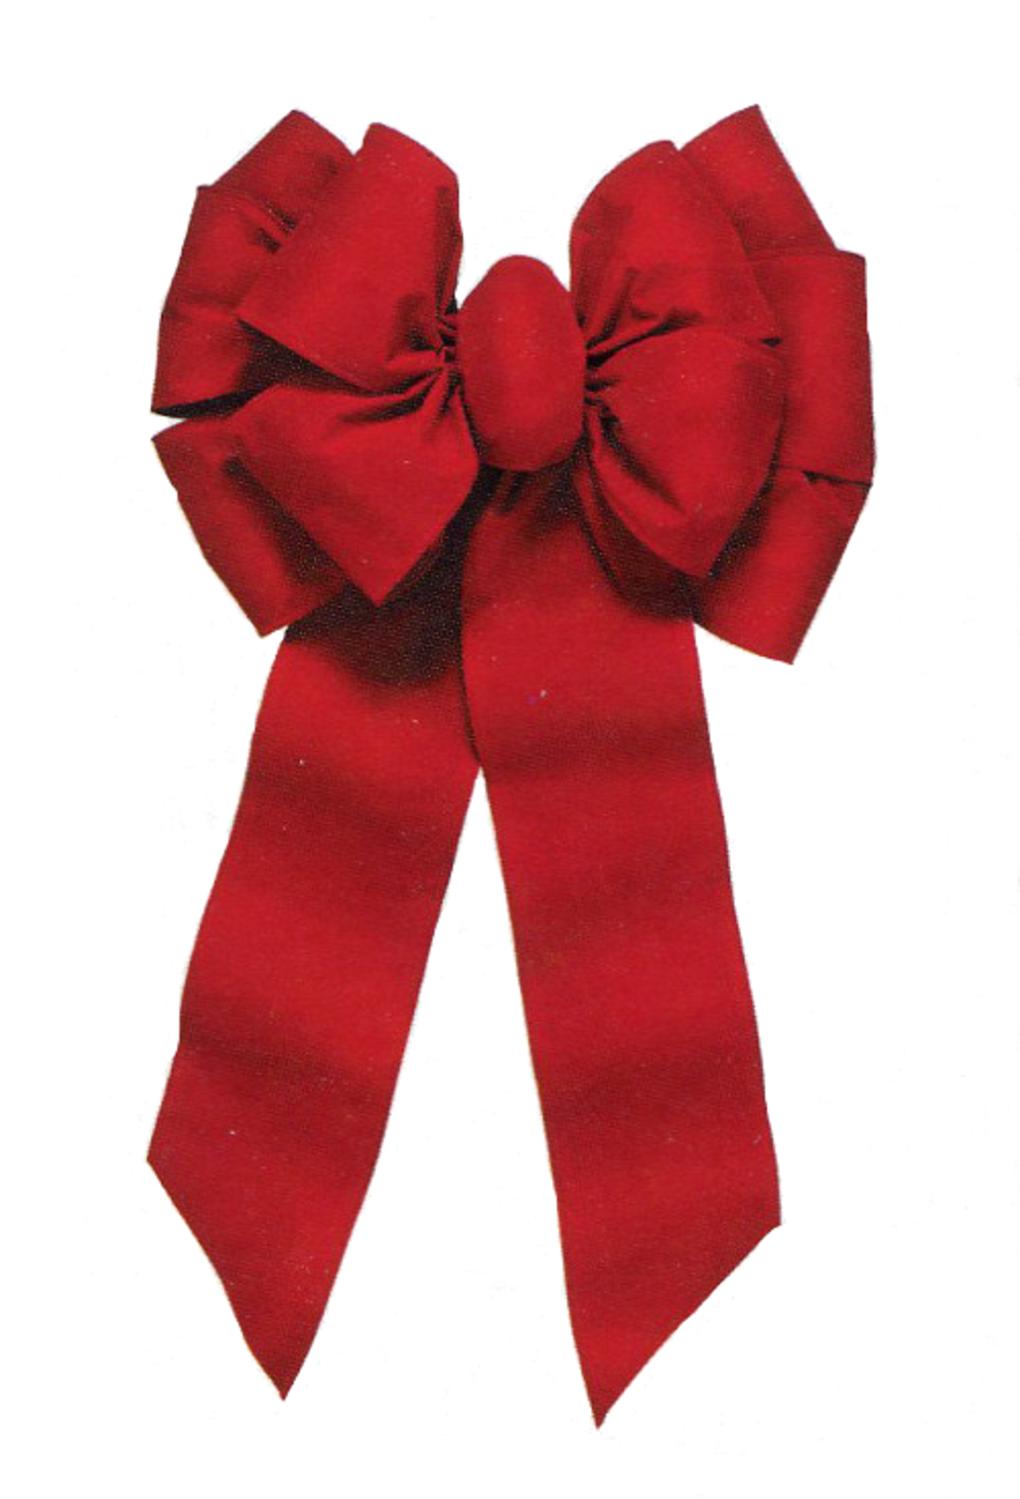 18" x 35" Large Red Indoor/Outdoor Velveteen 10-Loop Wired Christmas Holiday Bow | eBay